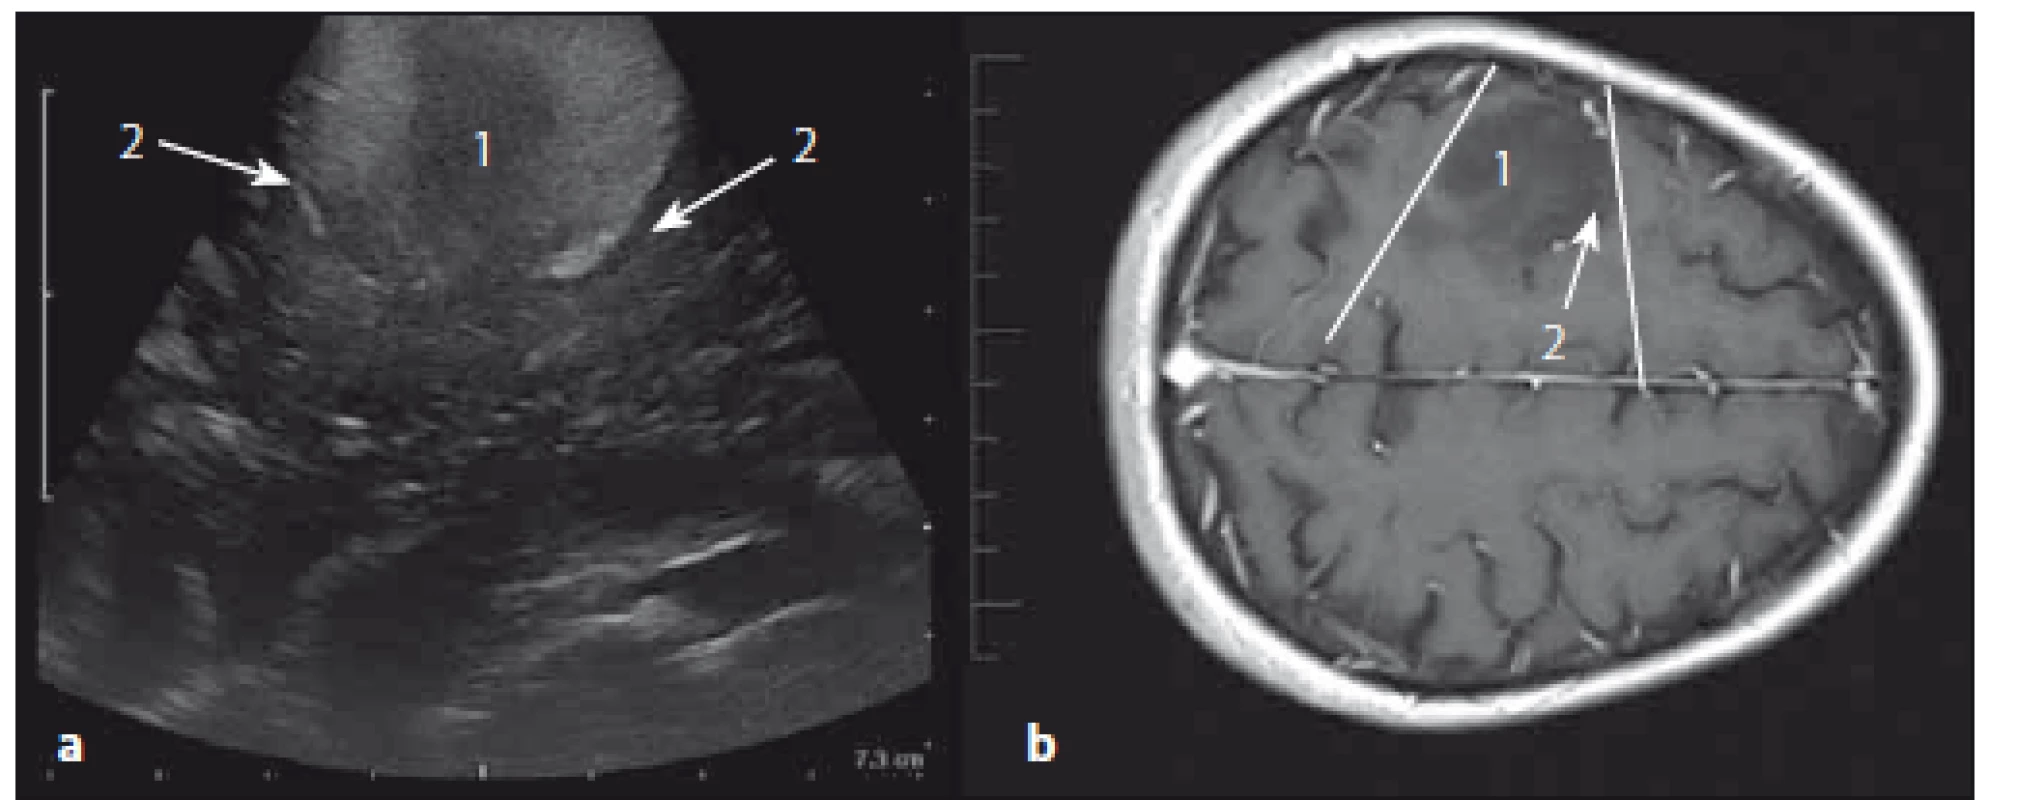 Astrocytom grade II frontálně vpravo – sonografický a MR T1W obraz.
Fig. 10. Low-grade astrocytoma (grade II) of the right frontal lobe – ultrasound and MRI T1W images.